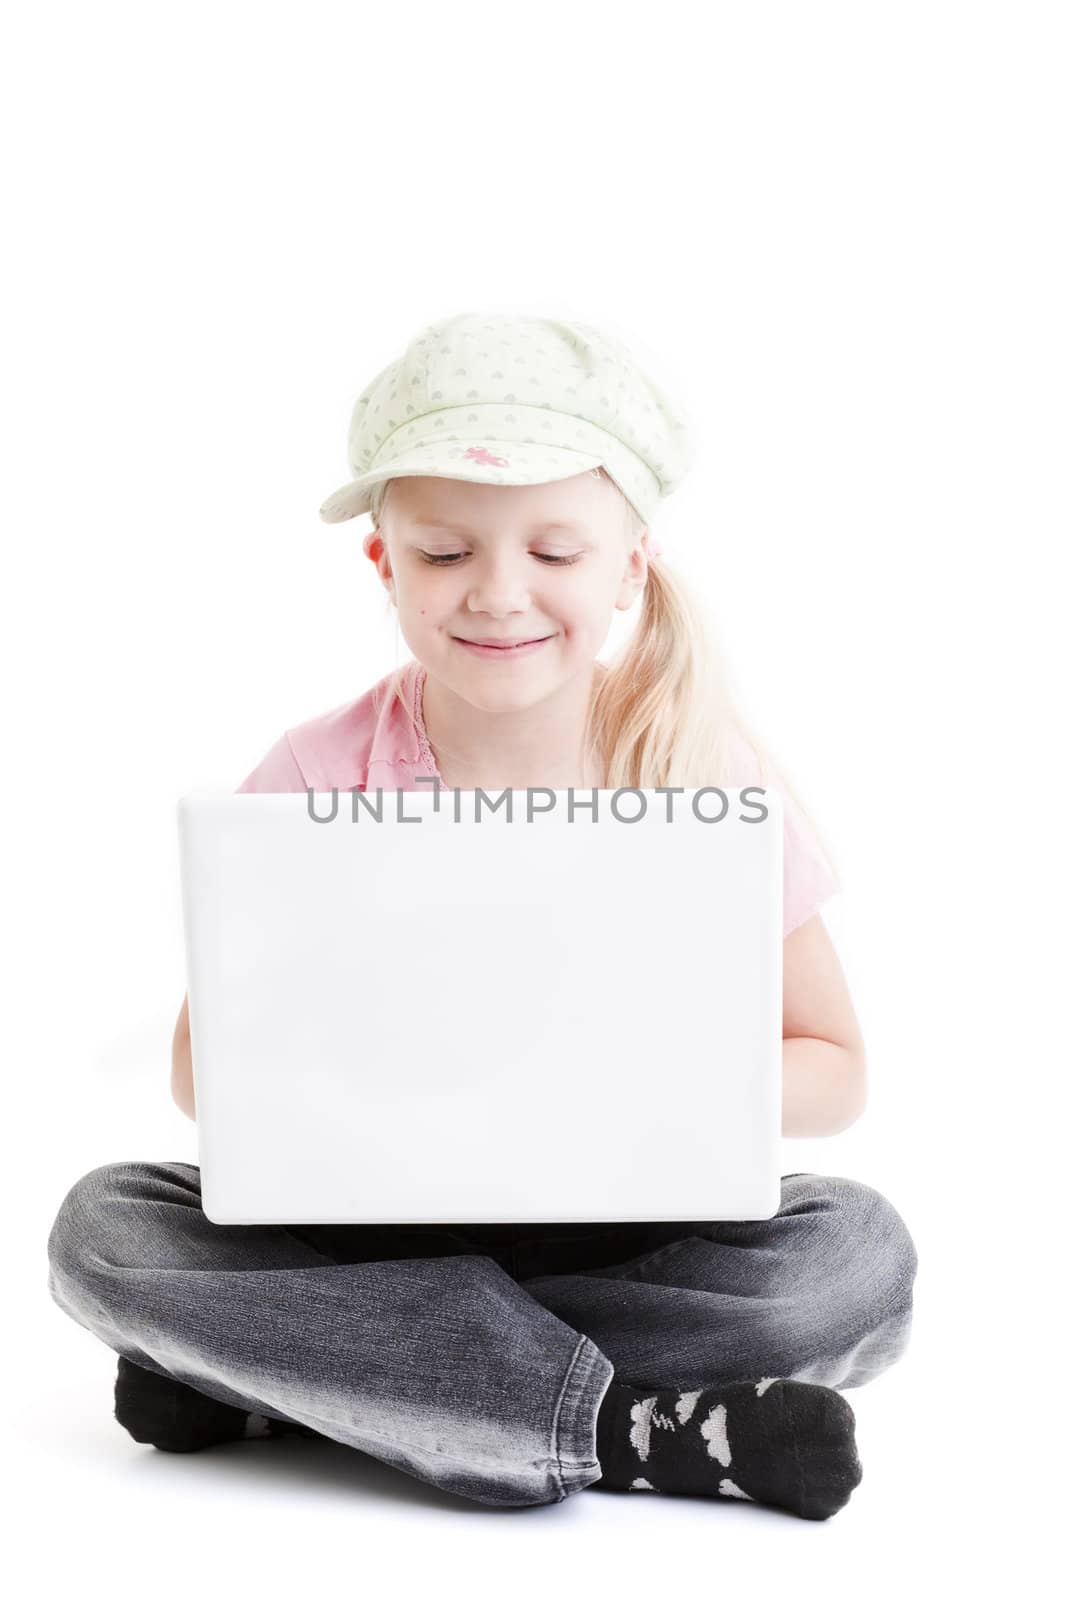 Young girl using a laptop computer over white